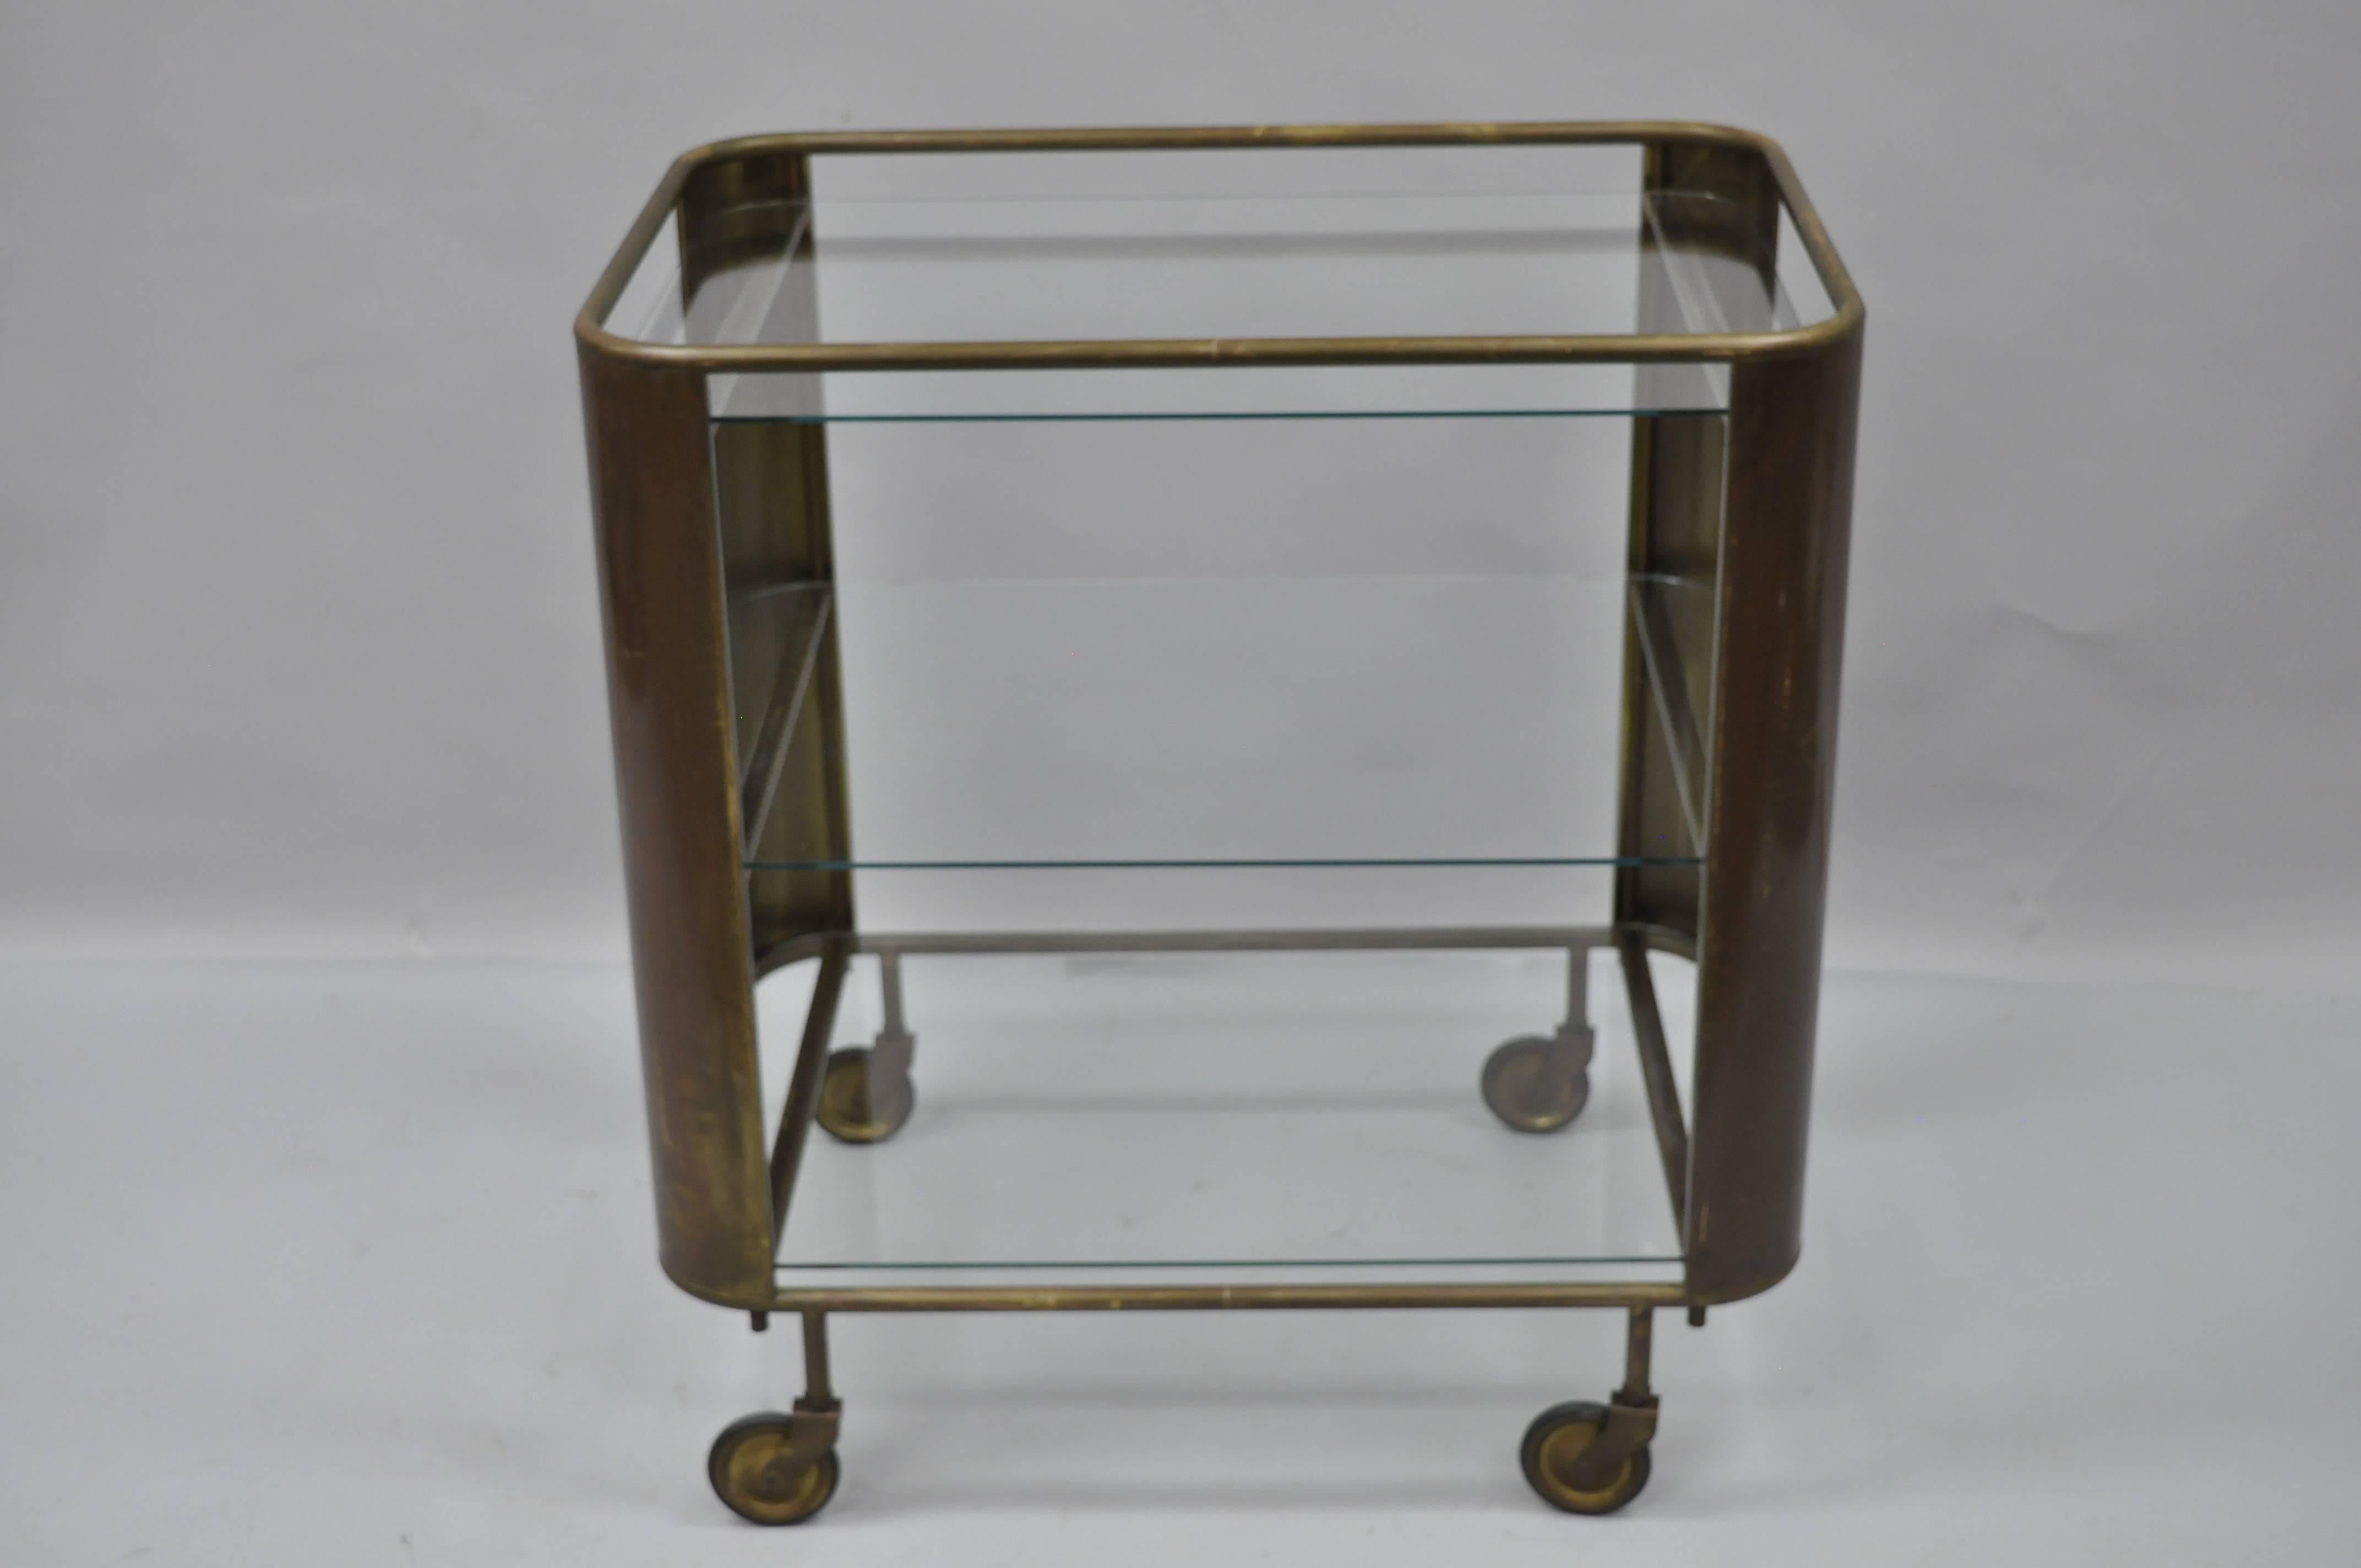 Vintage Italian Mid Century Modern burnished brass and glass modernist bar cart trolley. Item features a antiqued/burnished brass frame, three floating glass shelves and rolling casters. Attractive aged patina to brass. Very unique bar cart.